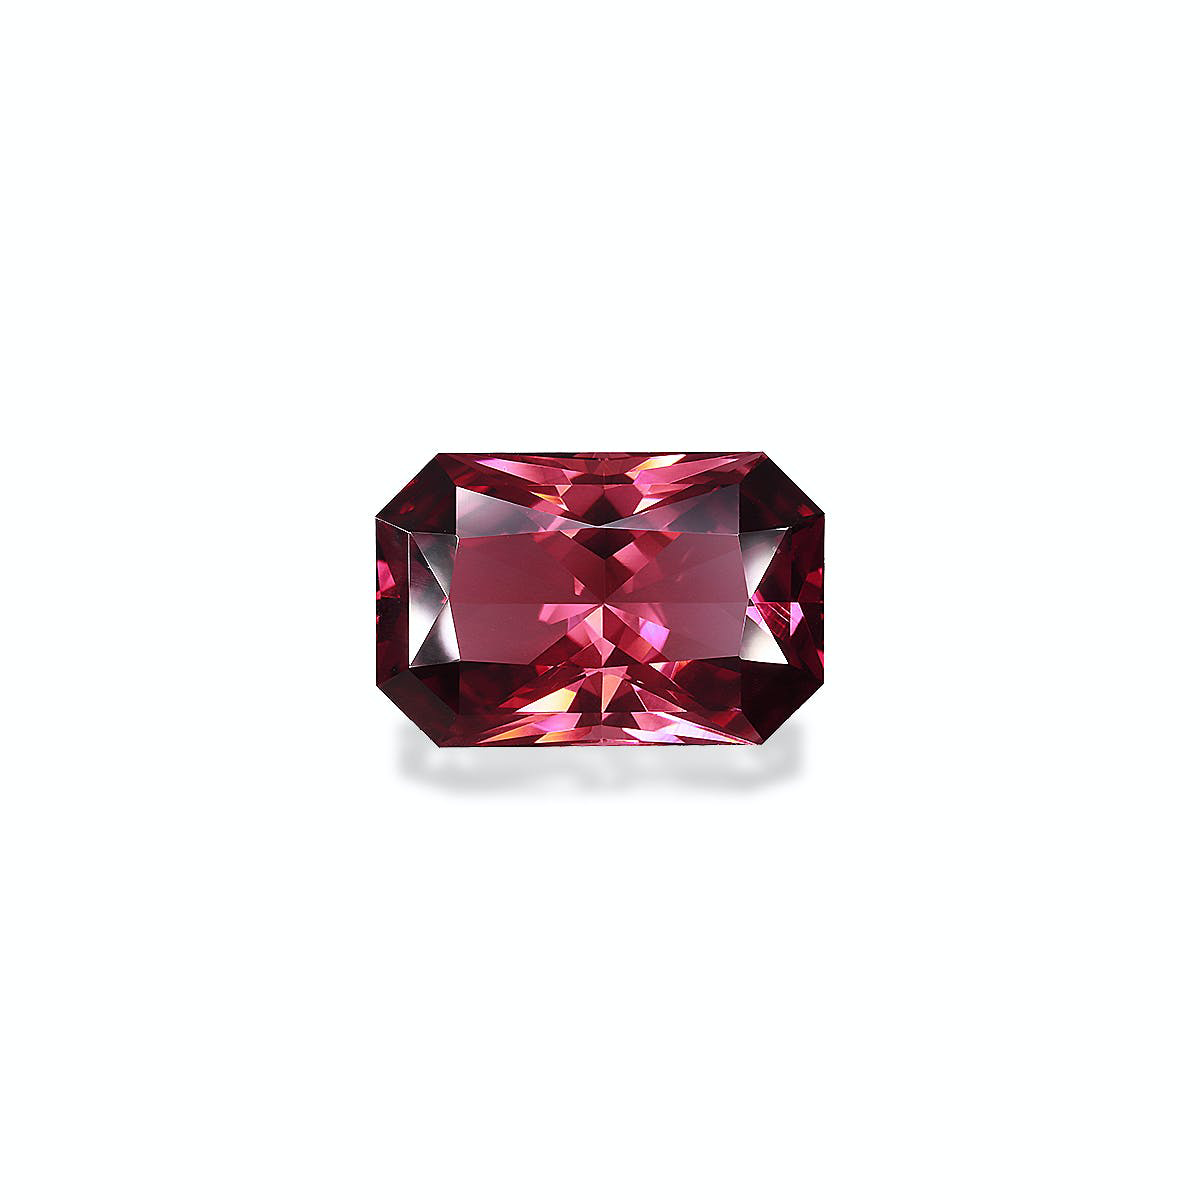 Picture of Rosewood Pink Tourmaline 31.20ct (BT0039)